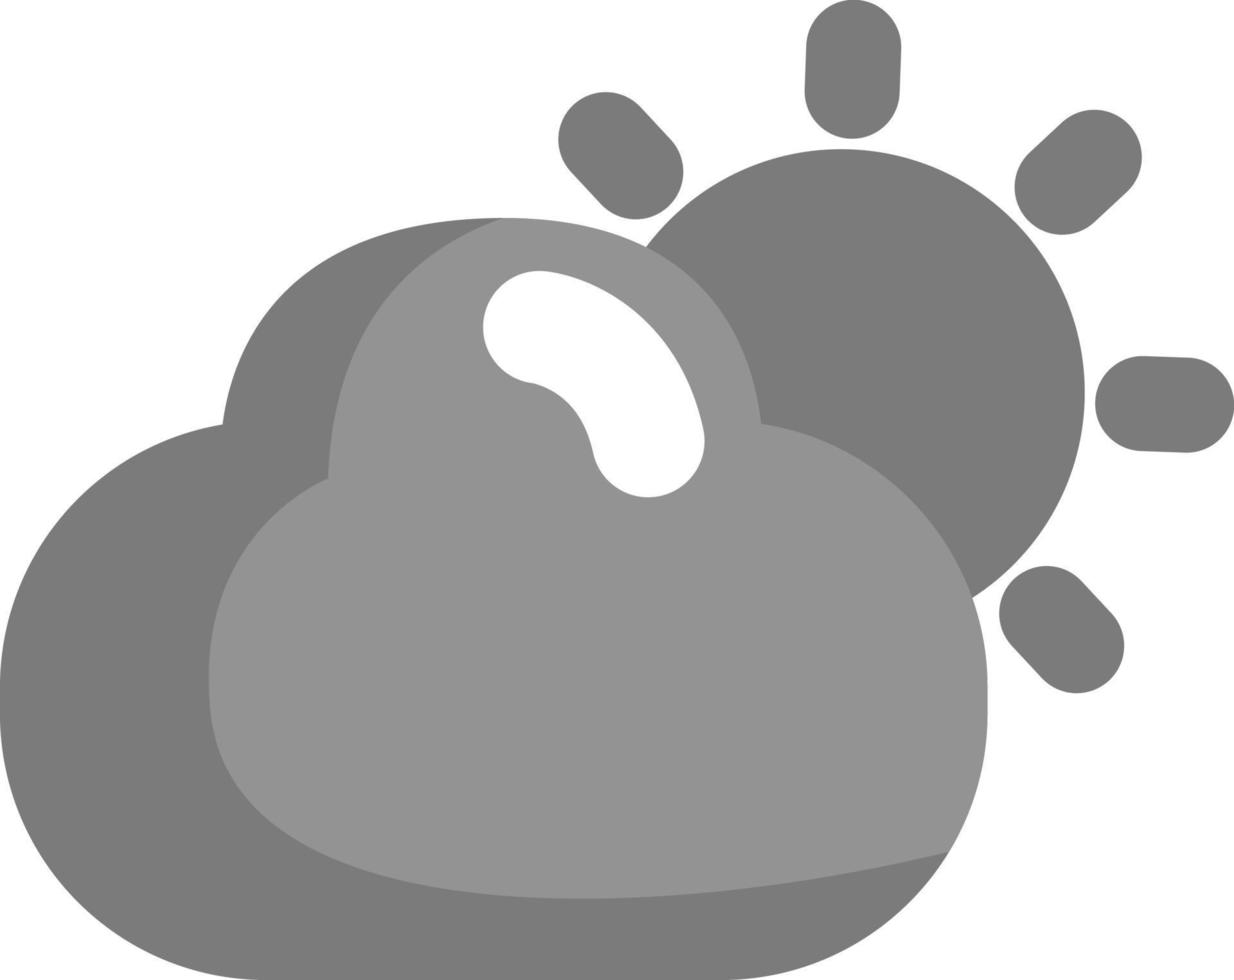 Grey cloud with sun, illustration, vector on a white background.